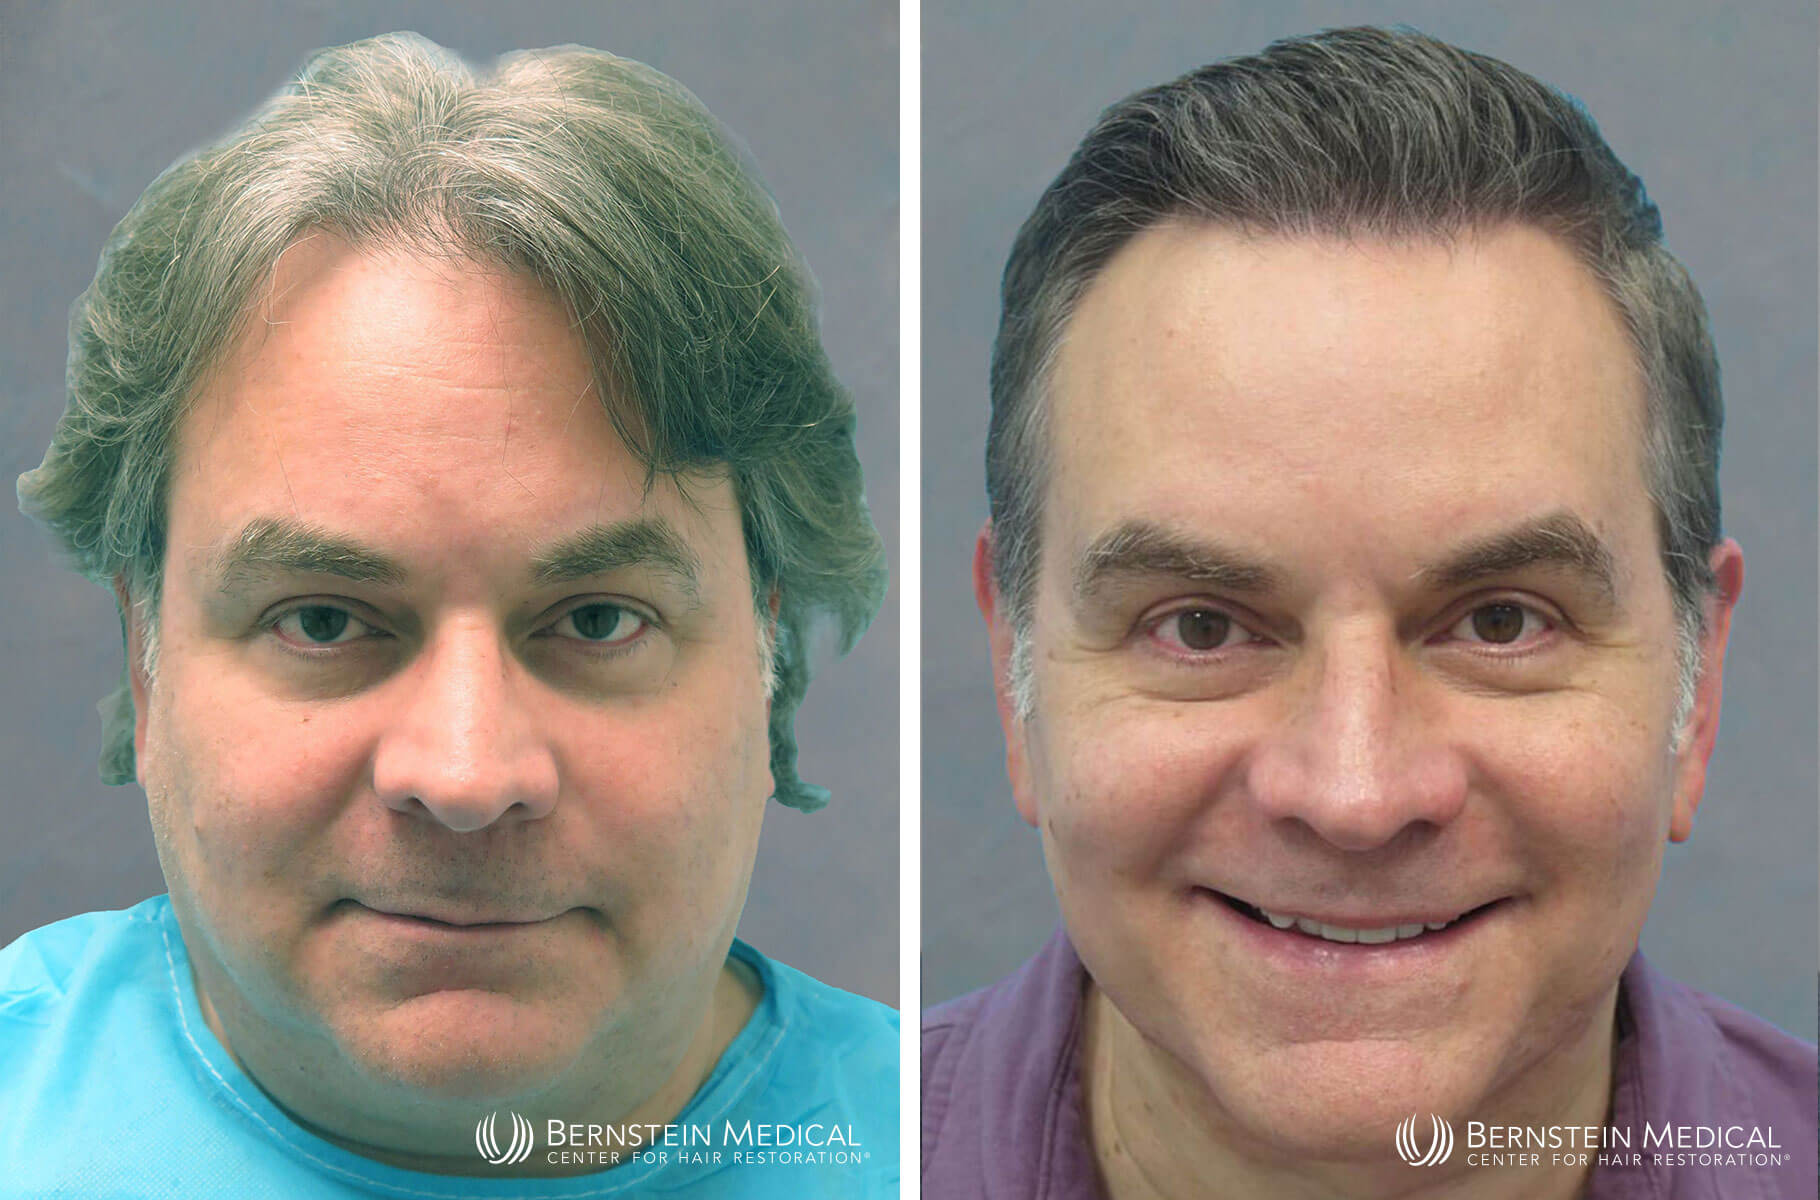 Bernstein Medical - Patient GTF Before and After Hair Transplant Photo 